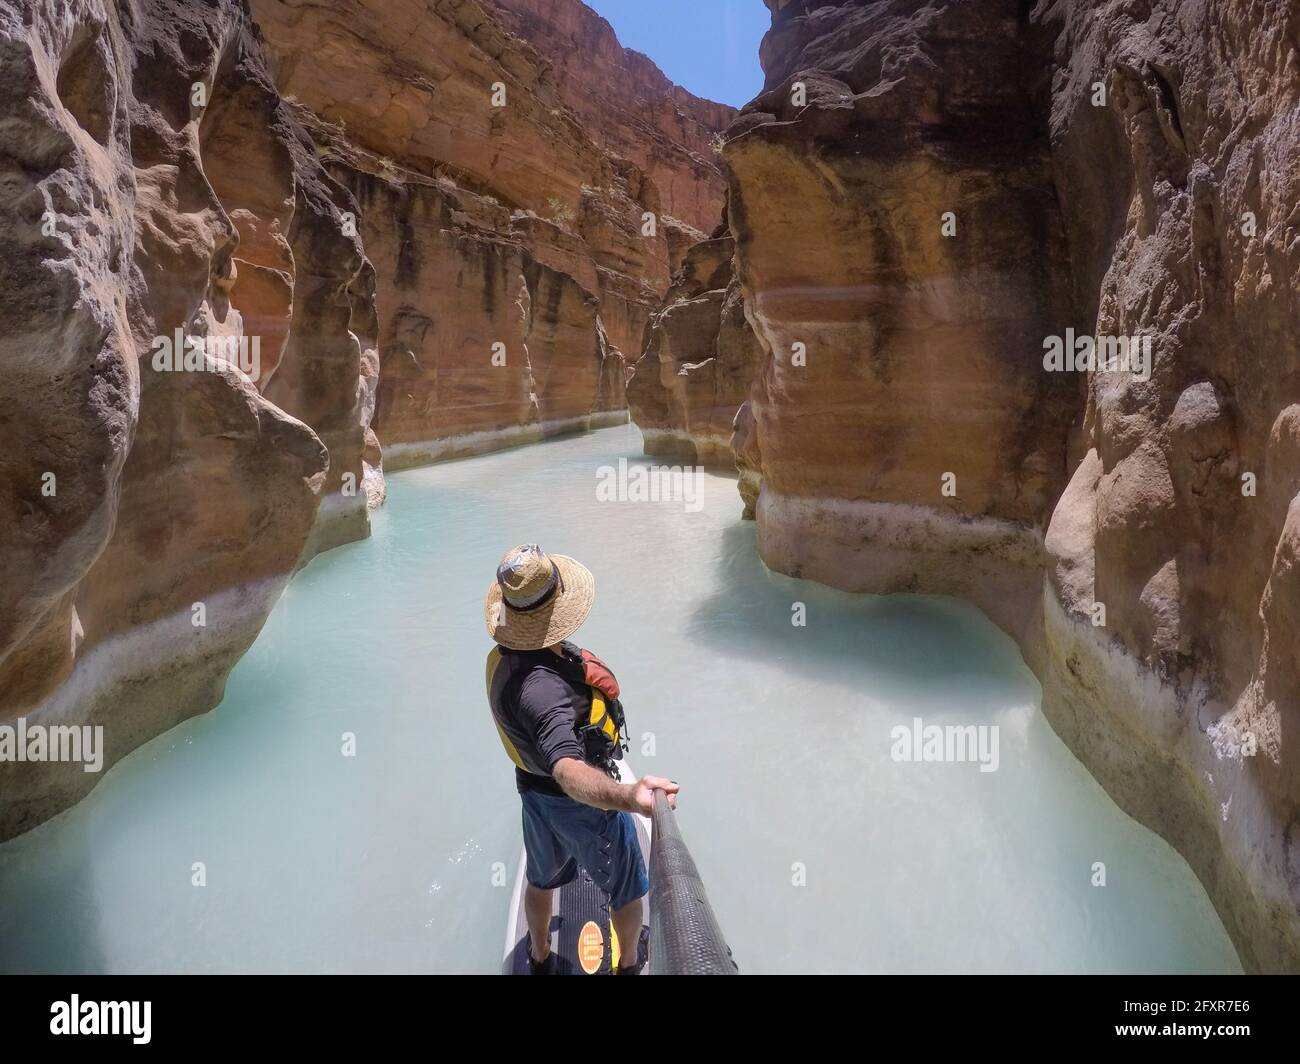 Photographer Skip Brown on a stand up paddle board at the mouth of Havasu Creek in the Grand Canyon, Arizona, United States of America, North America Stock Photo